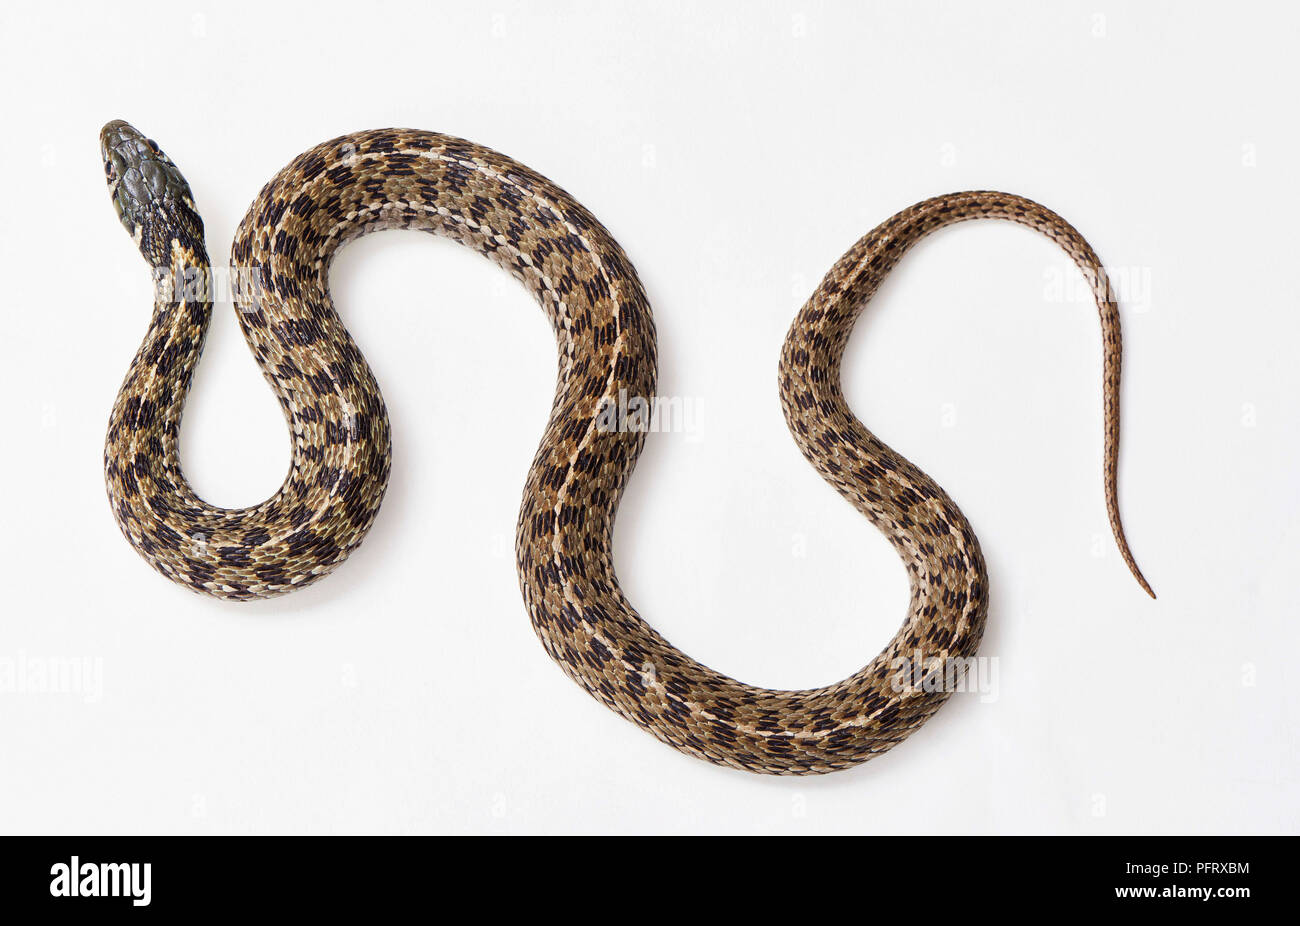 Checkered, Thamnophis marcianus. Banque D'Images